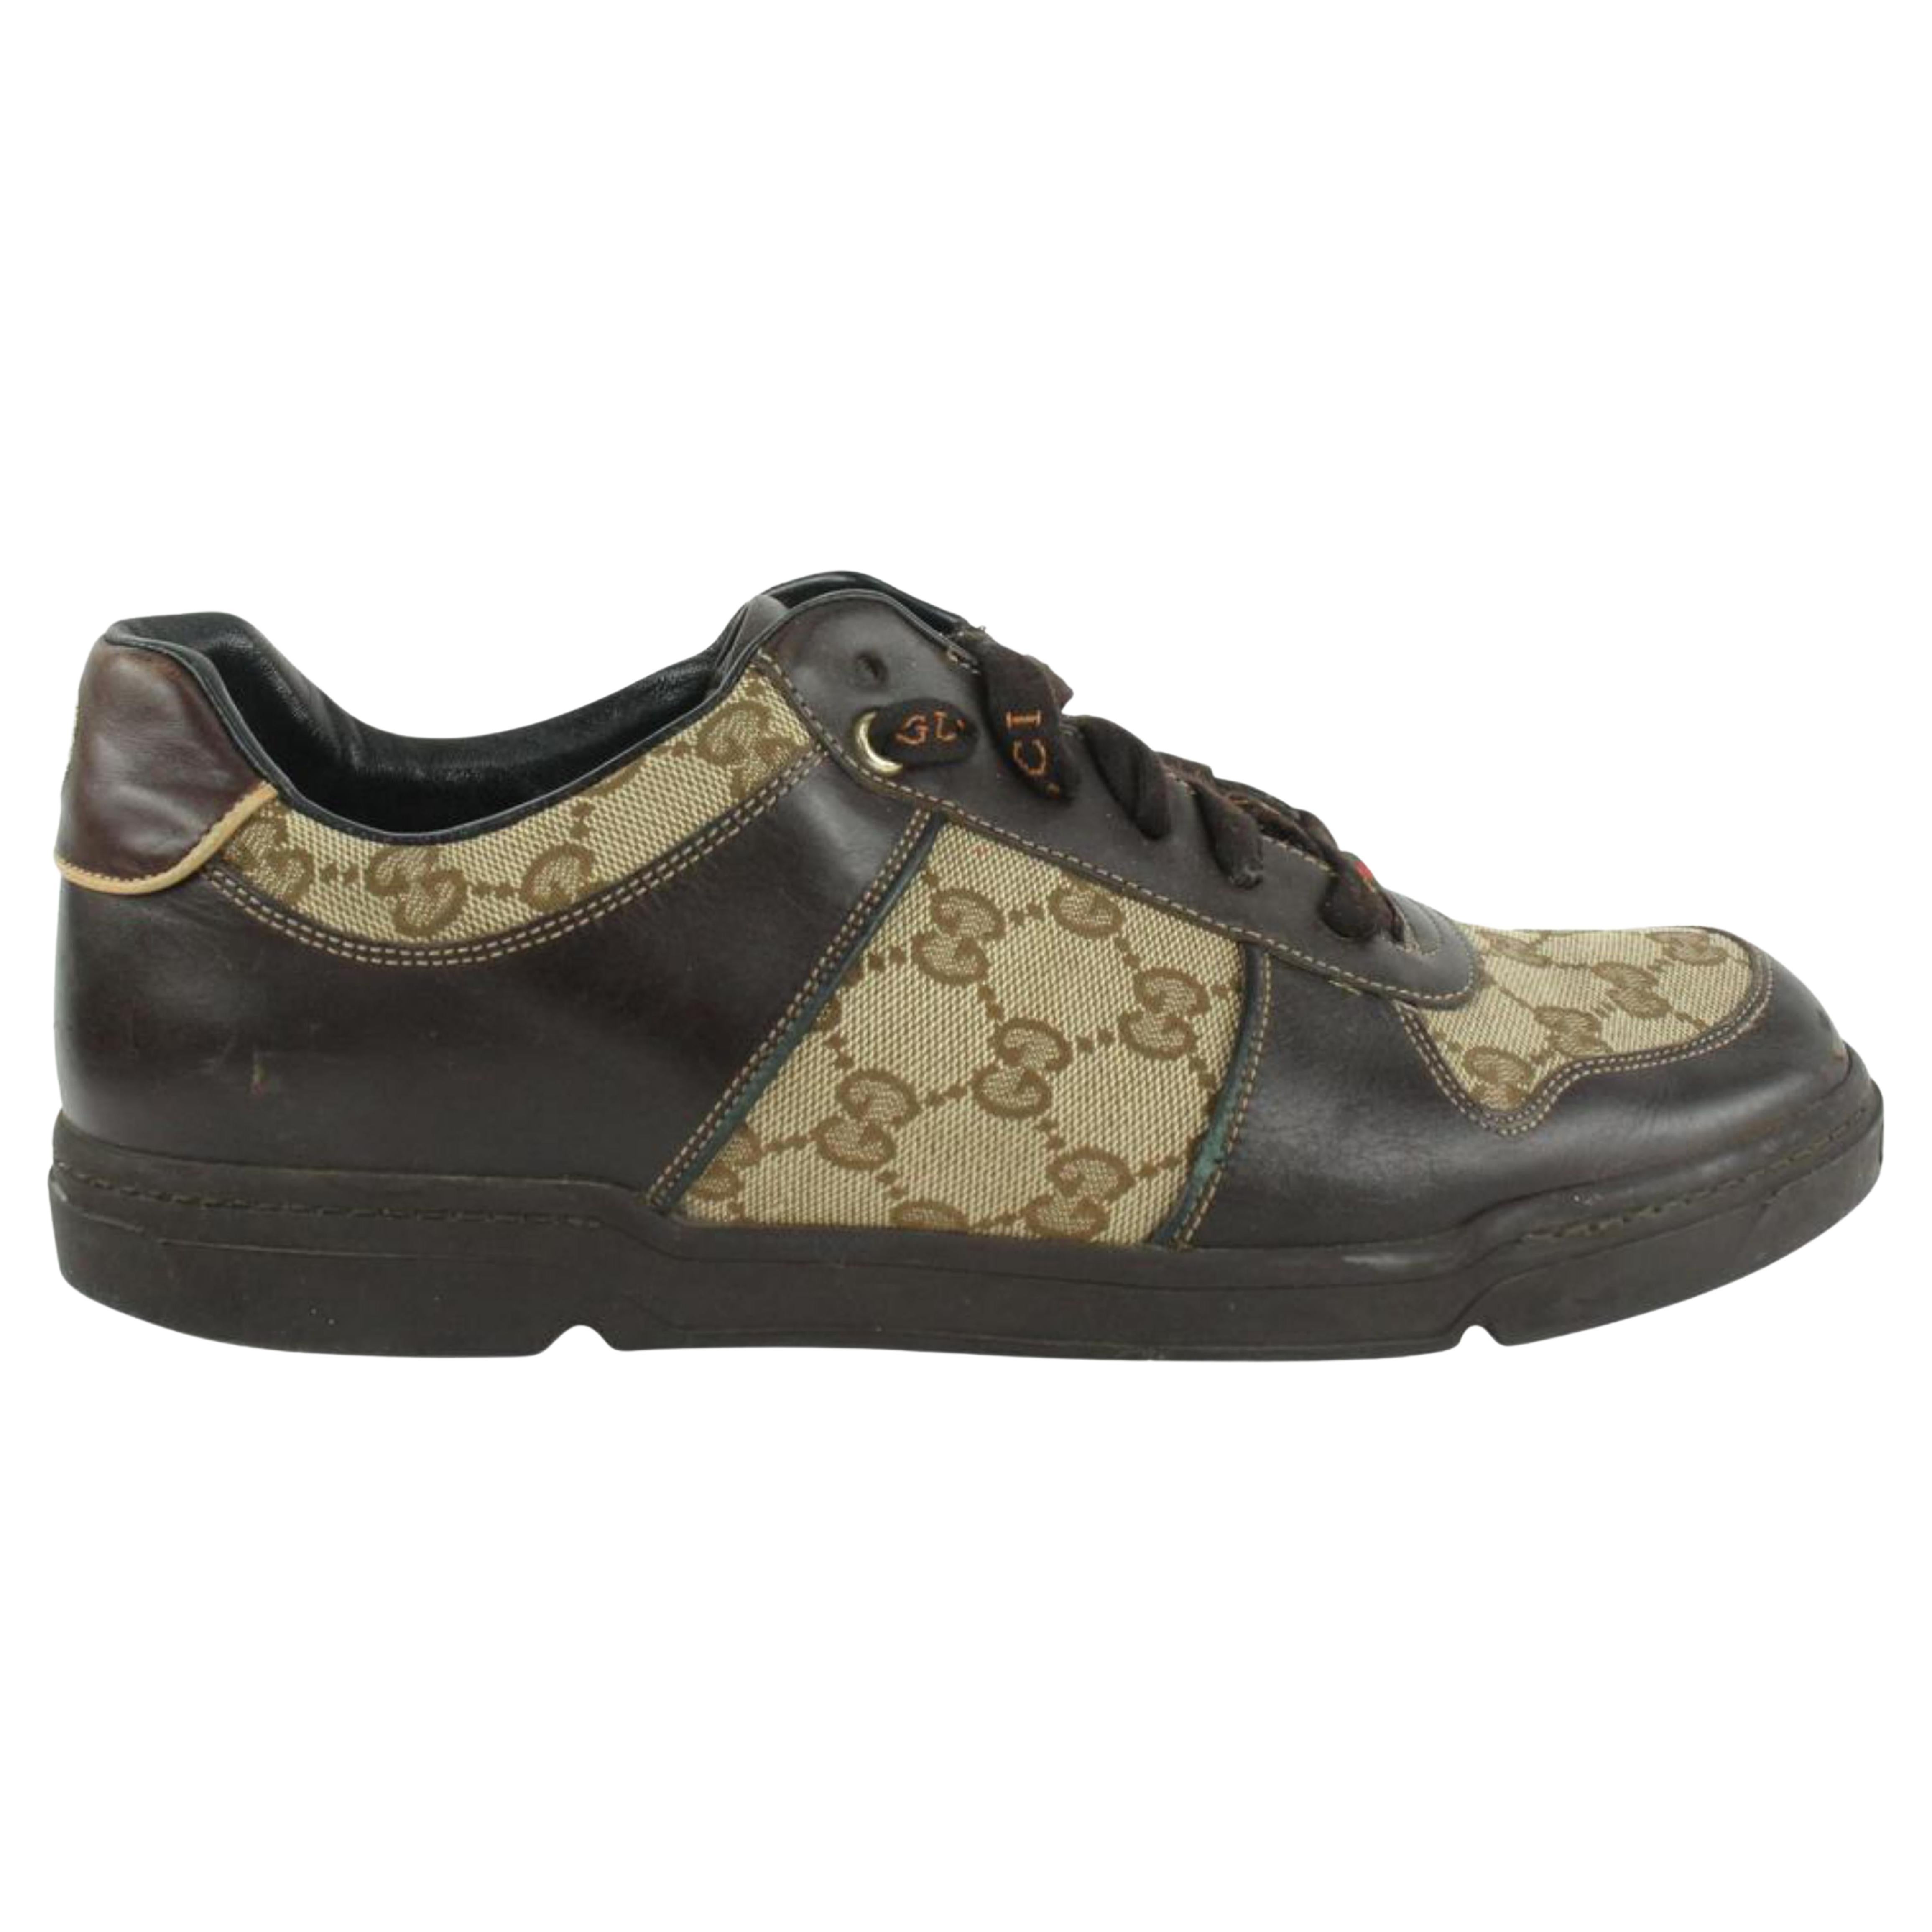 Gucci Men's 9 US Brown Monogram GG Signature Lace Low Sneakers 1216g50 For Sale